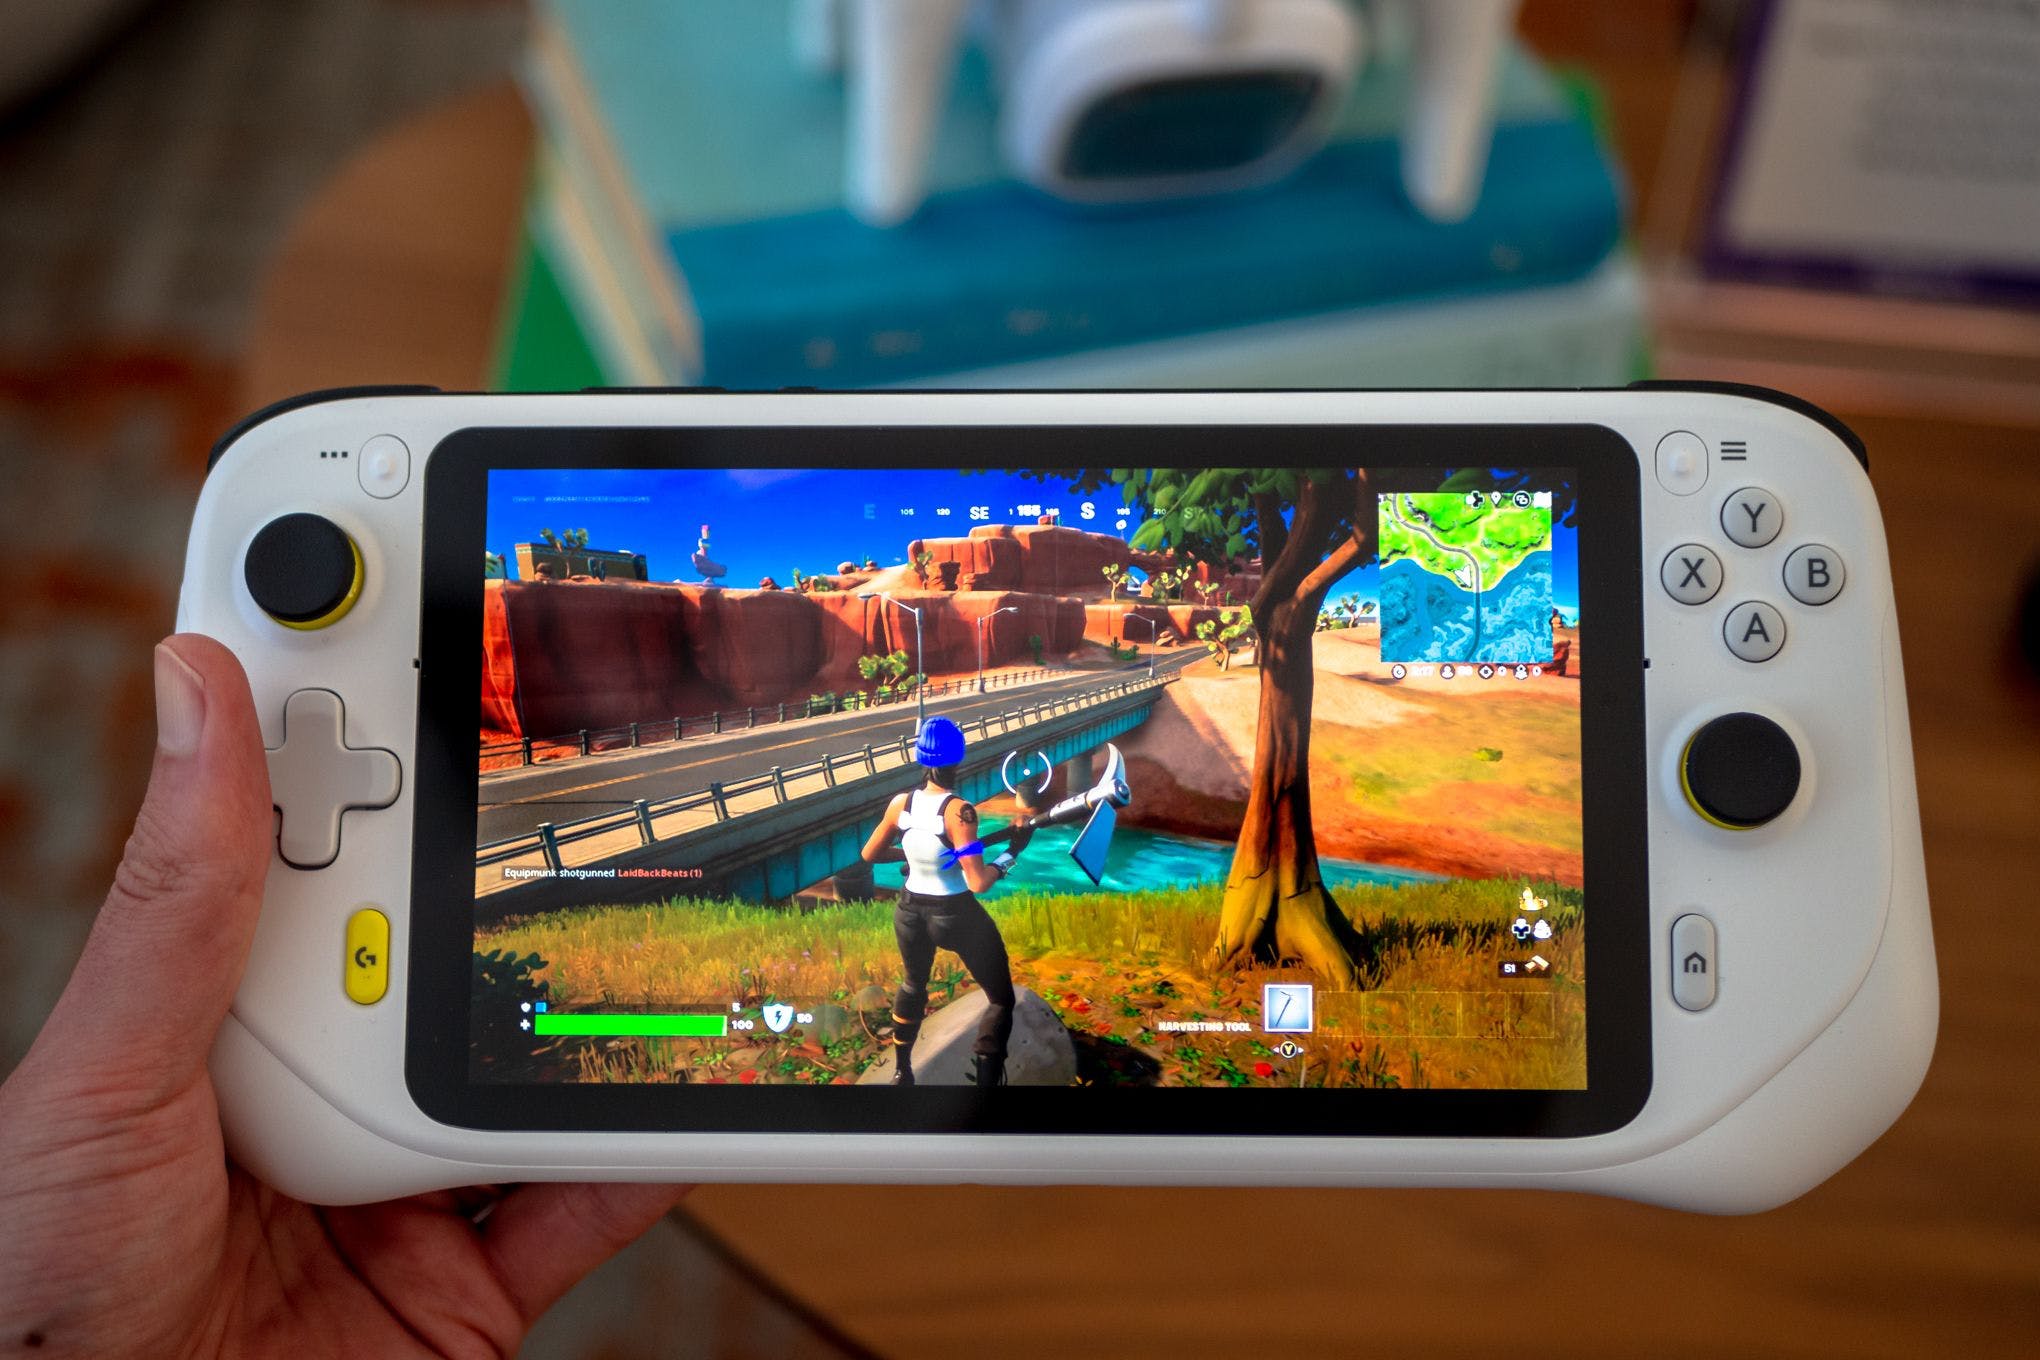 Holding Logitech’s G Cloud Gaming Handheld in one hand. It’s displaying the game Fortnite, wherein a character is staring off a cliff into the horizon.